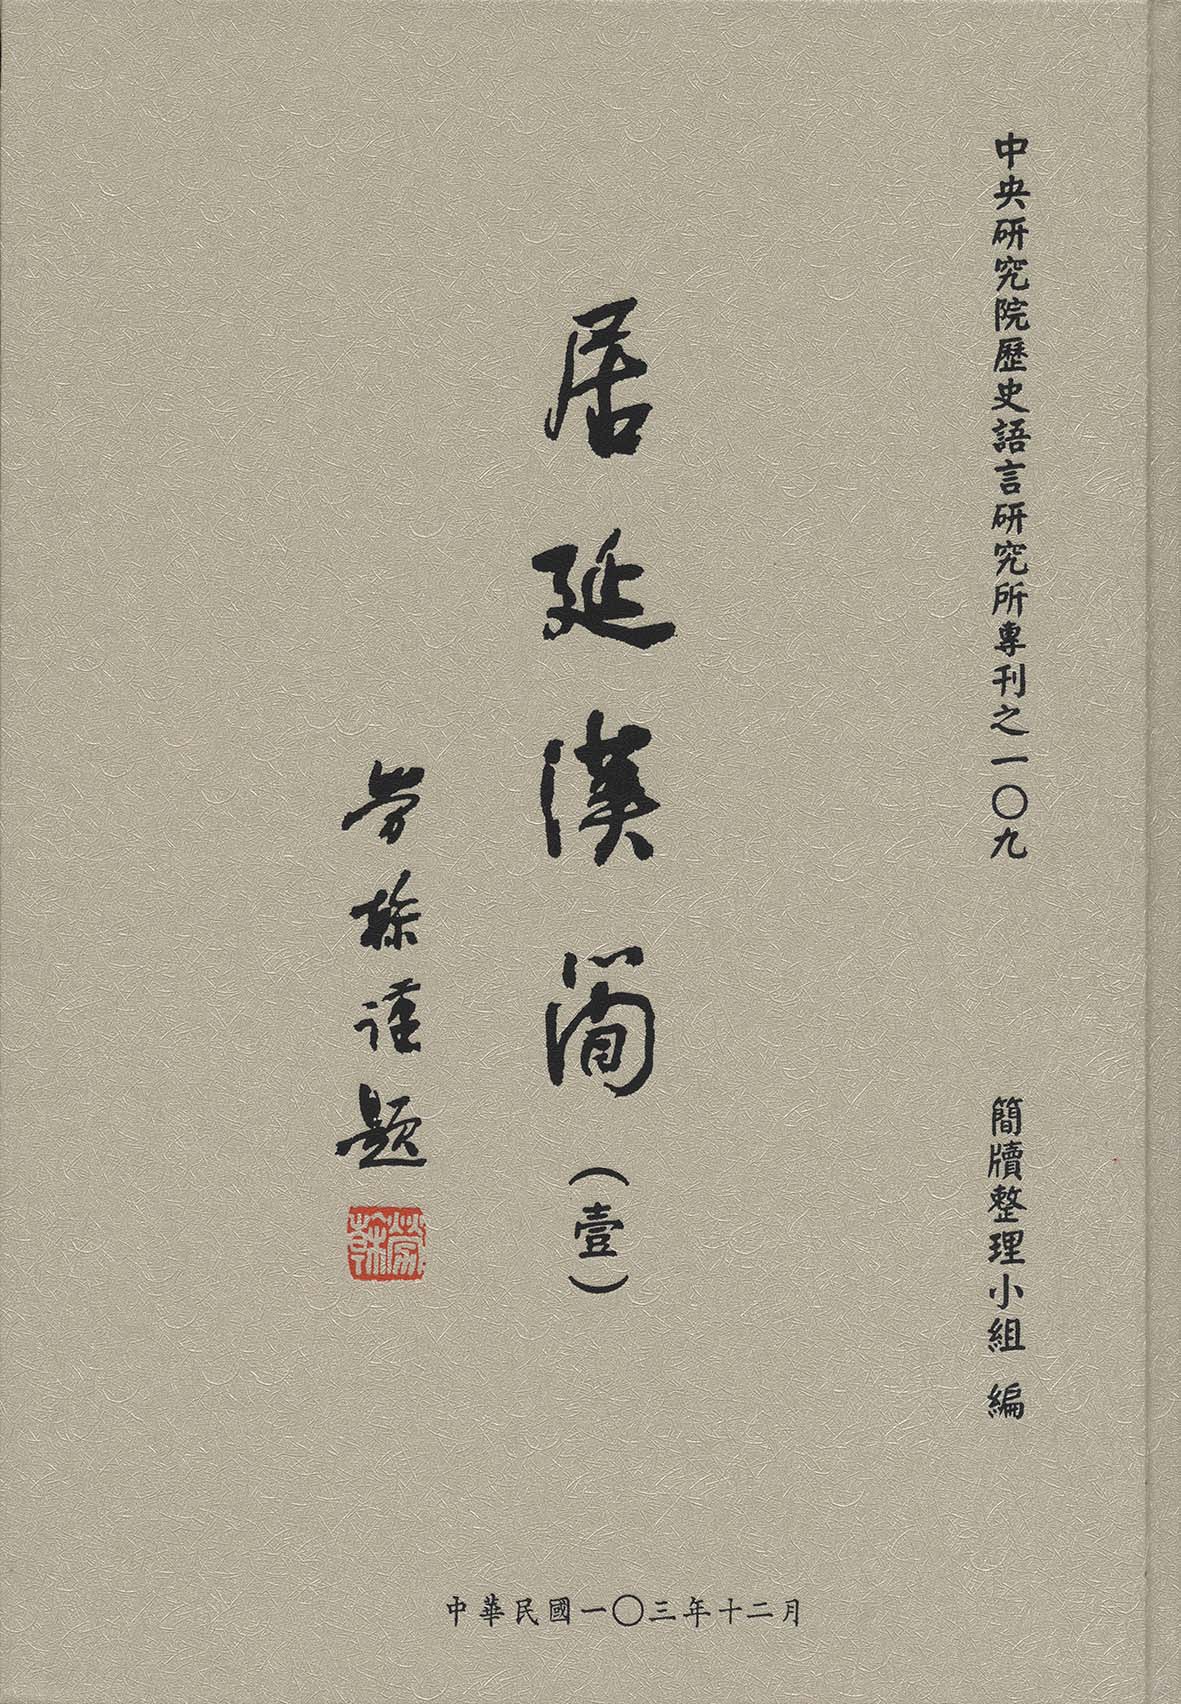 The Documents of the Han Dynasty on Wooden Slips from Edsen-Gol (Volume I)